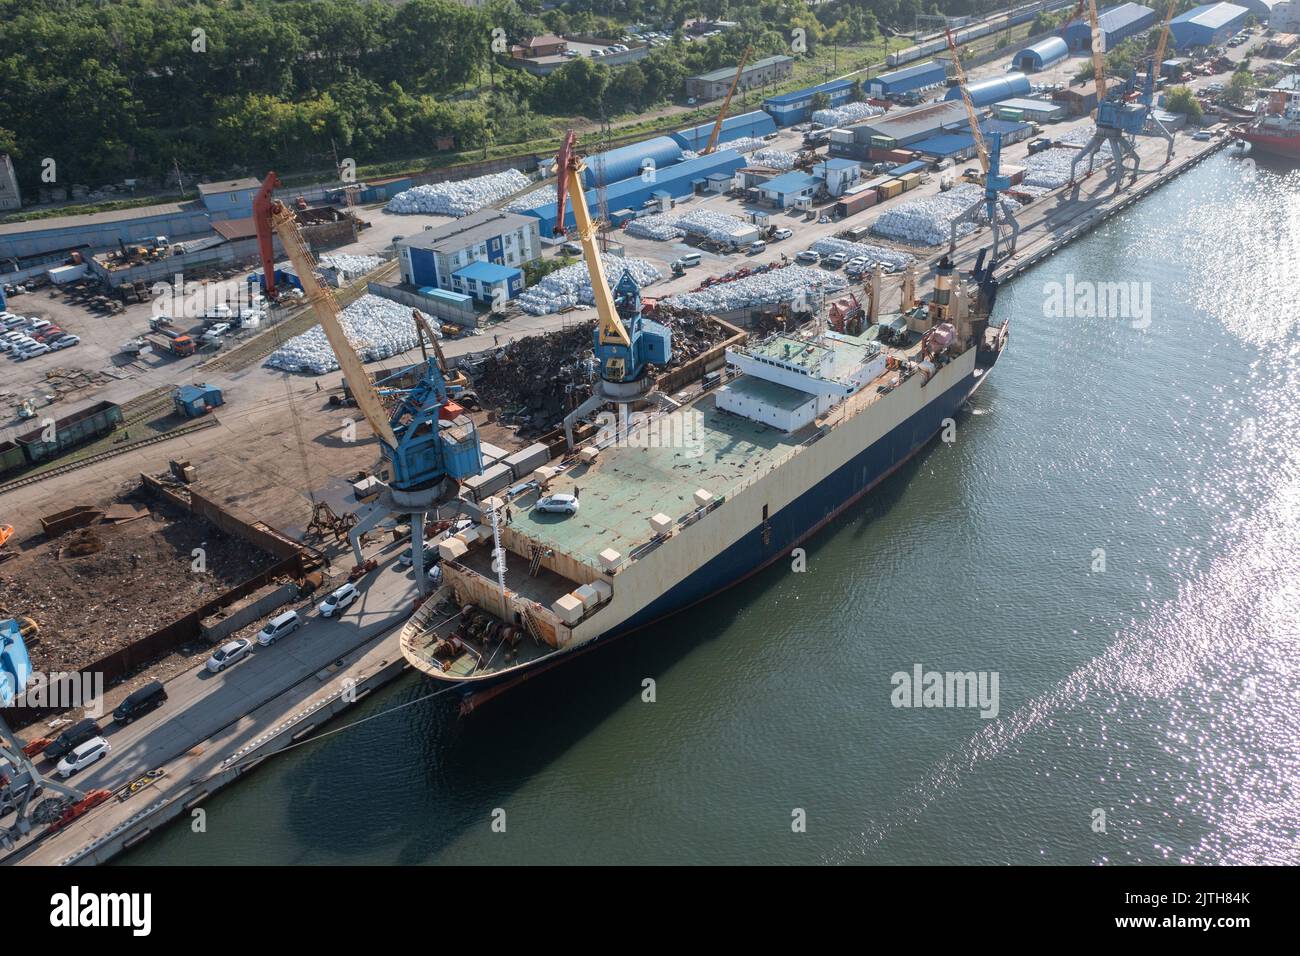 Vladivostok, Russia - June 24, 2022: The vessel is at the berth for unloading. Stock Photo